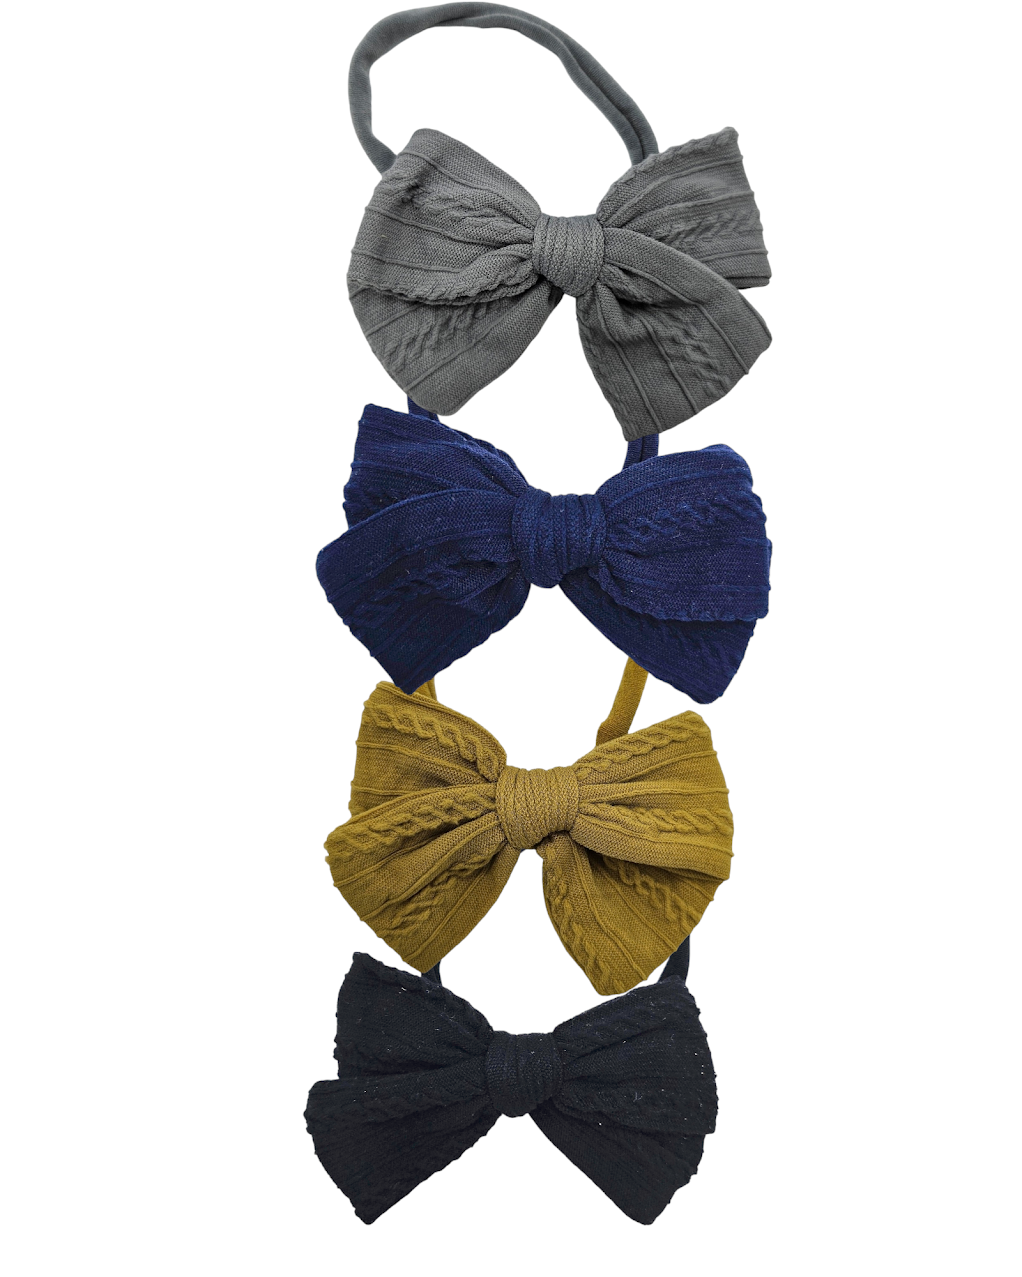 Pack Of 4 - 3.5 Inch Cable Knit Dainty Bow Headbands Bundle - Betty Brown Boutique Ltd